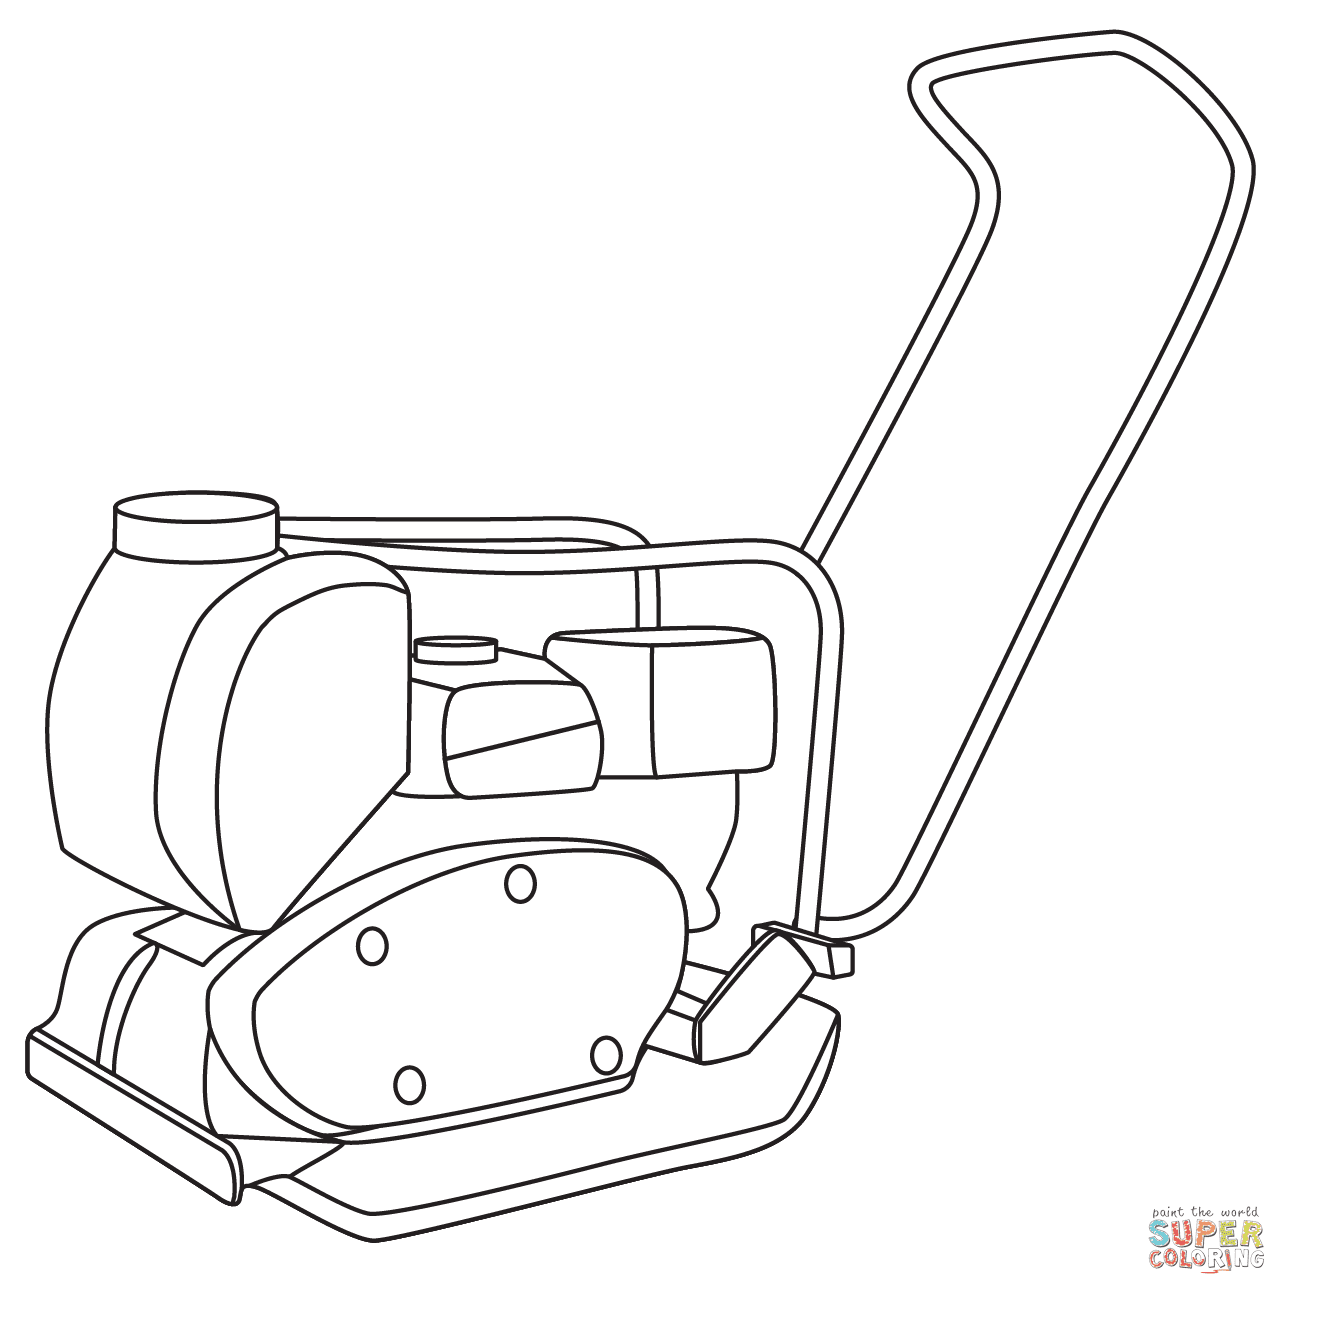 Vibratory Compactor Coloring Page